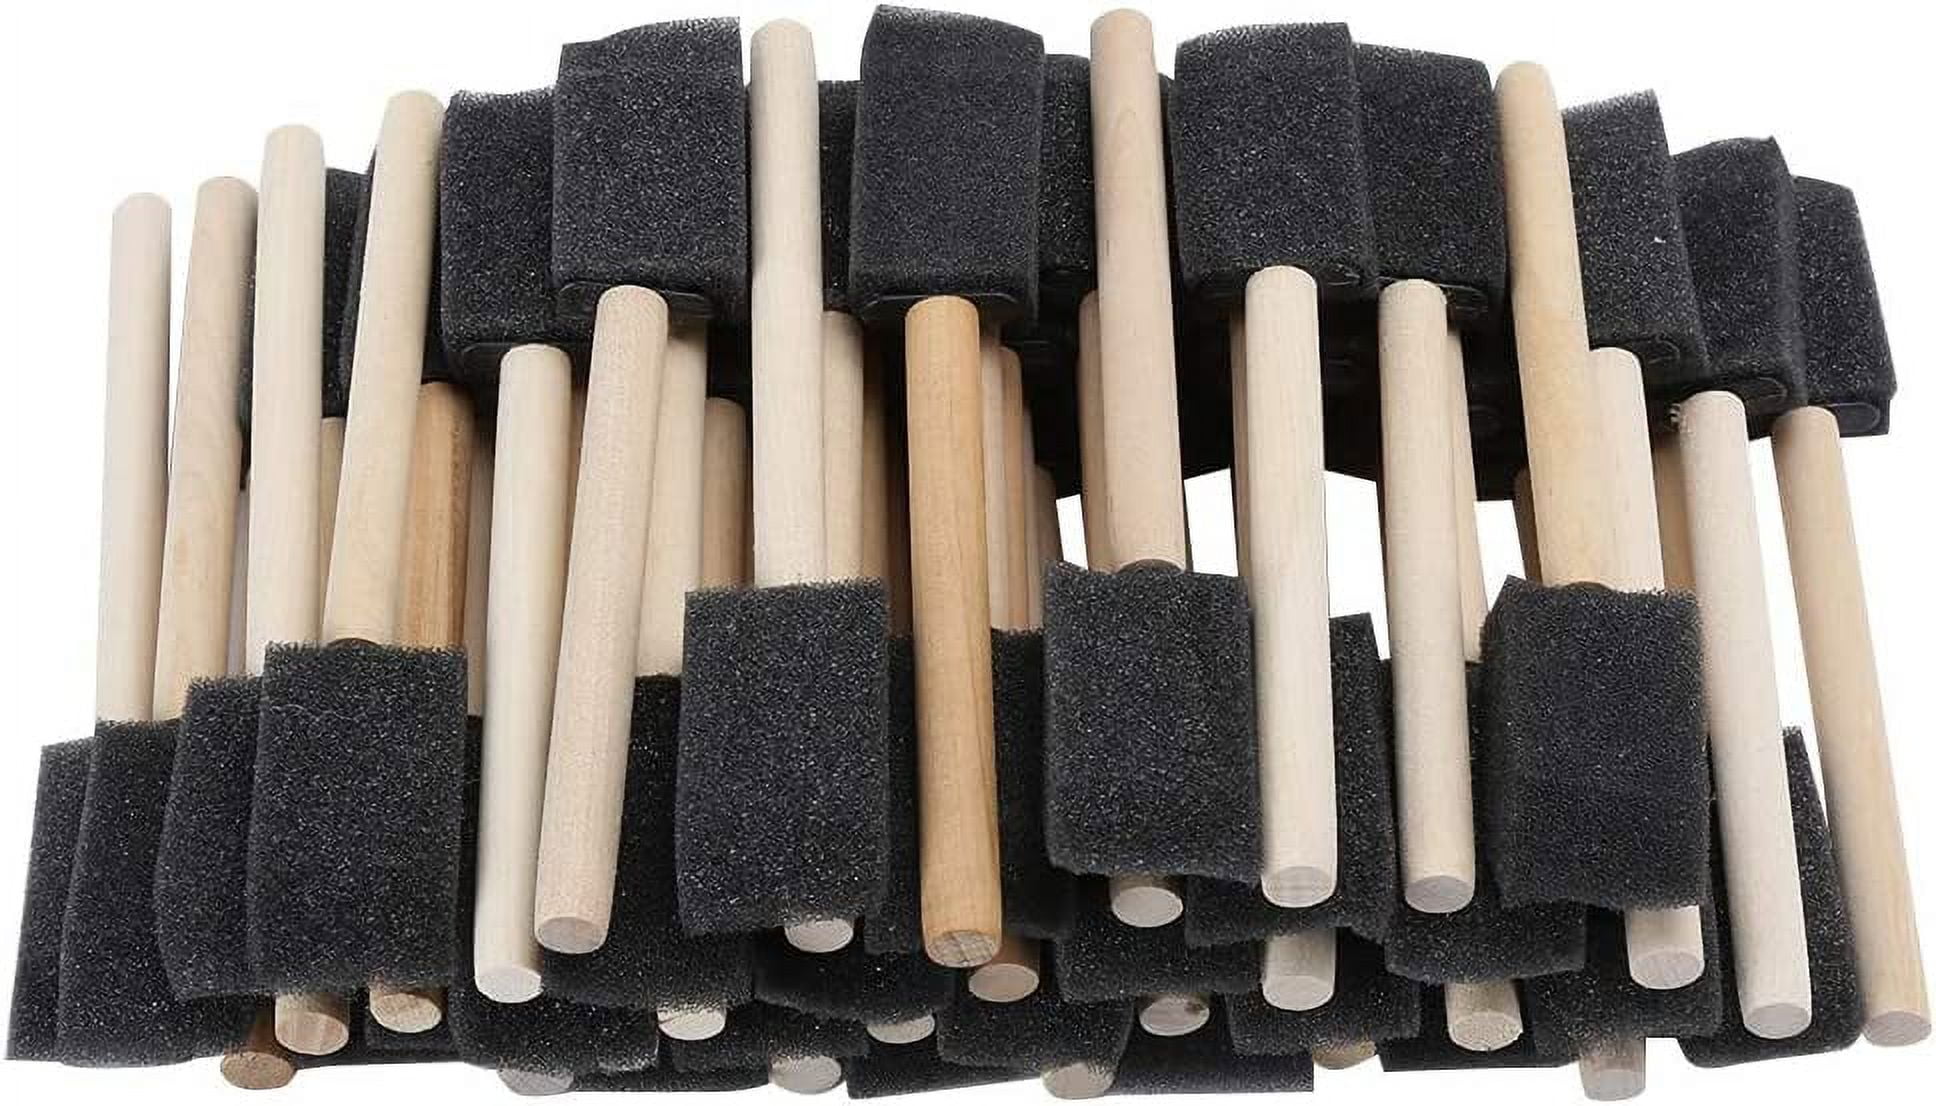 Art Supply Variety Pack Foam Sponge Wood Handle Paint Brush Set, Great for  Acrylics, Stains, Varnishes, Crafts - AliExpress